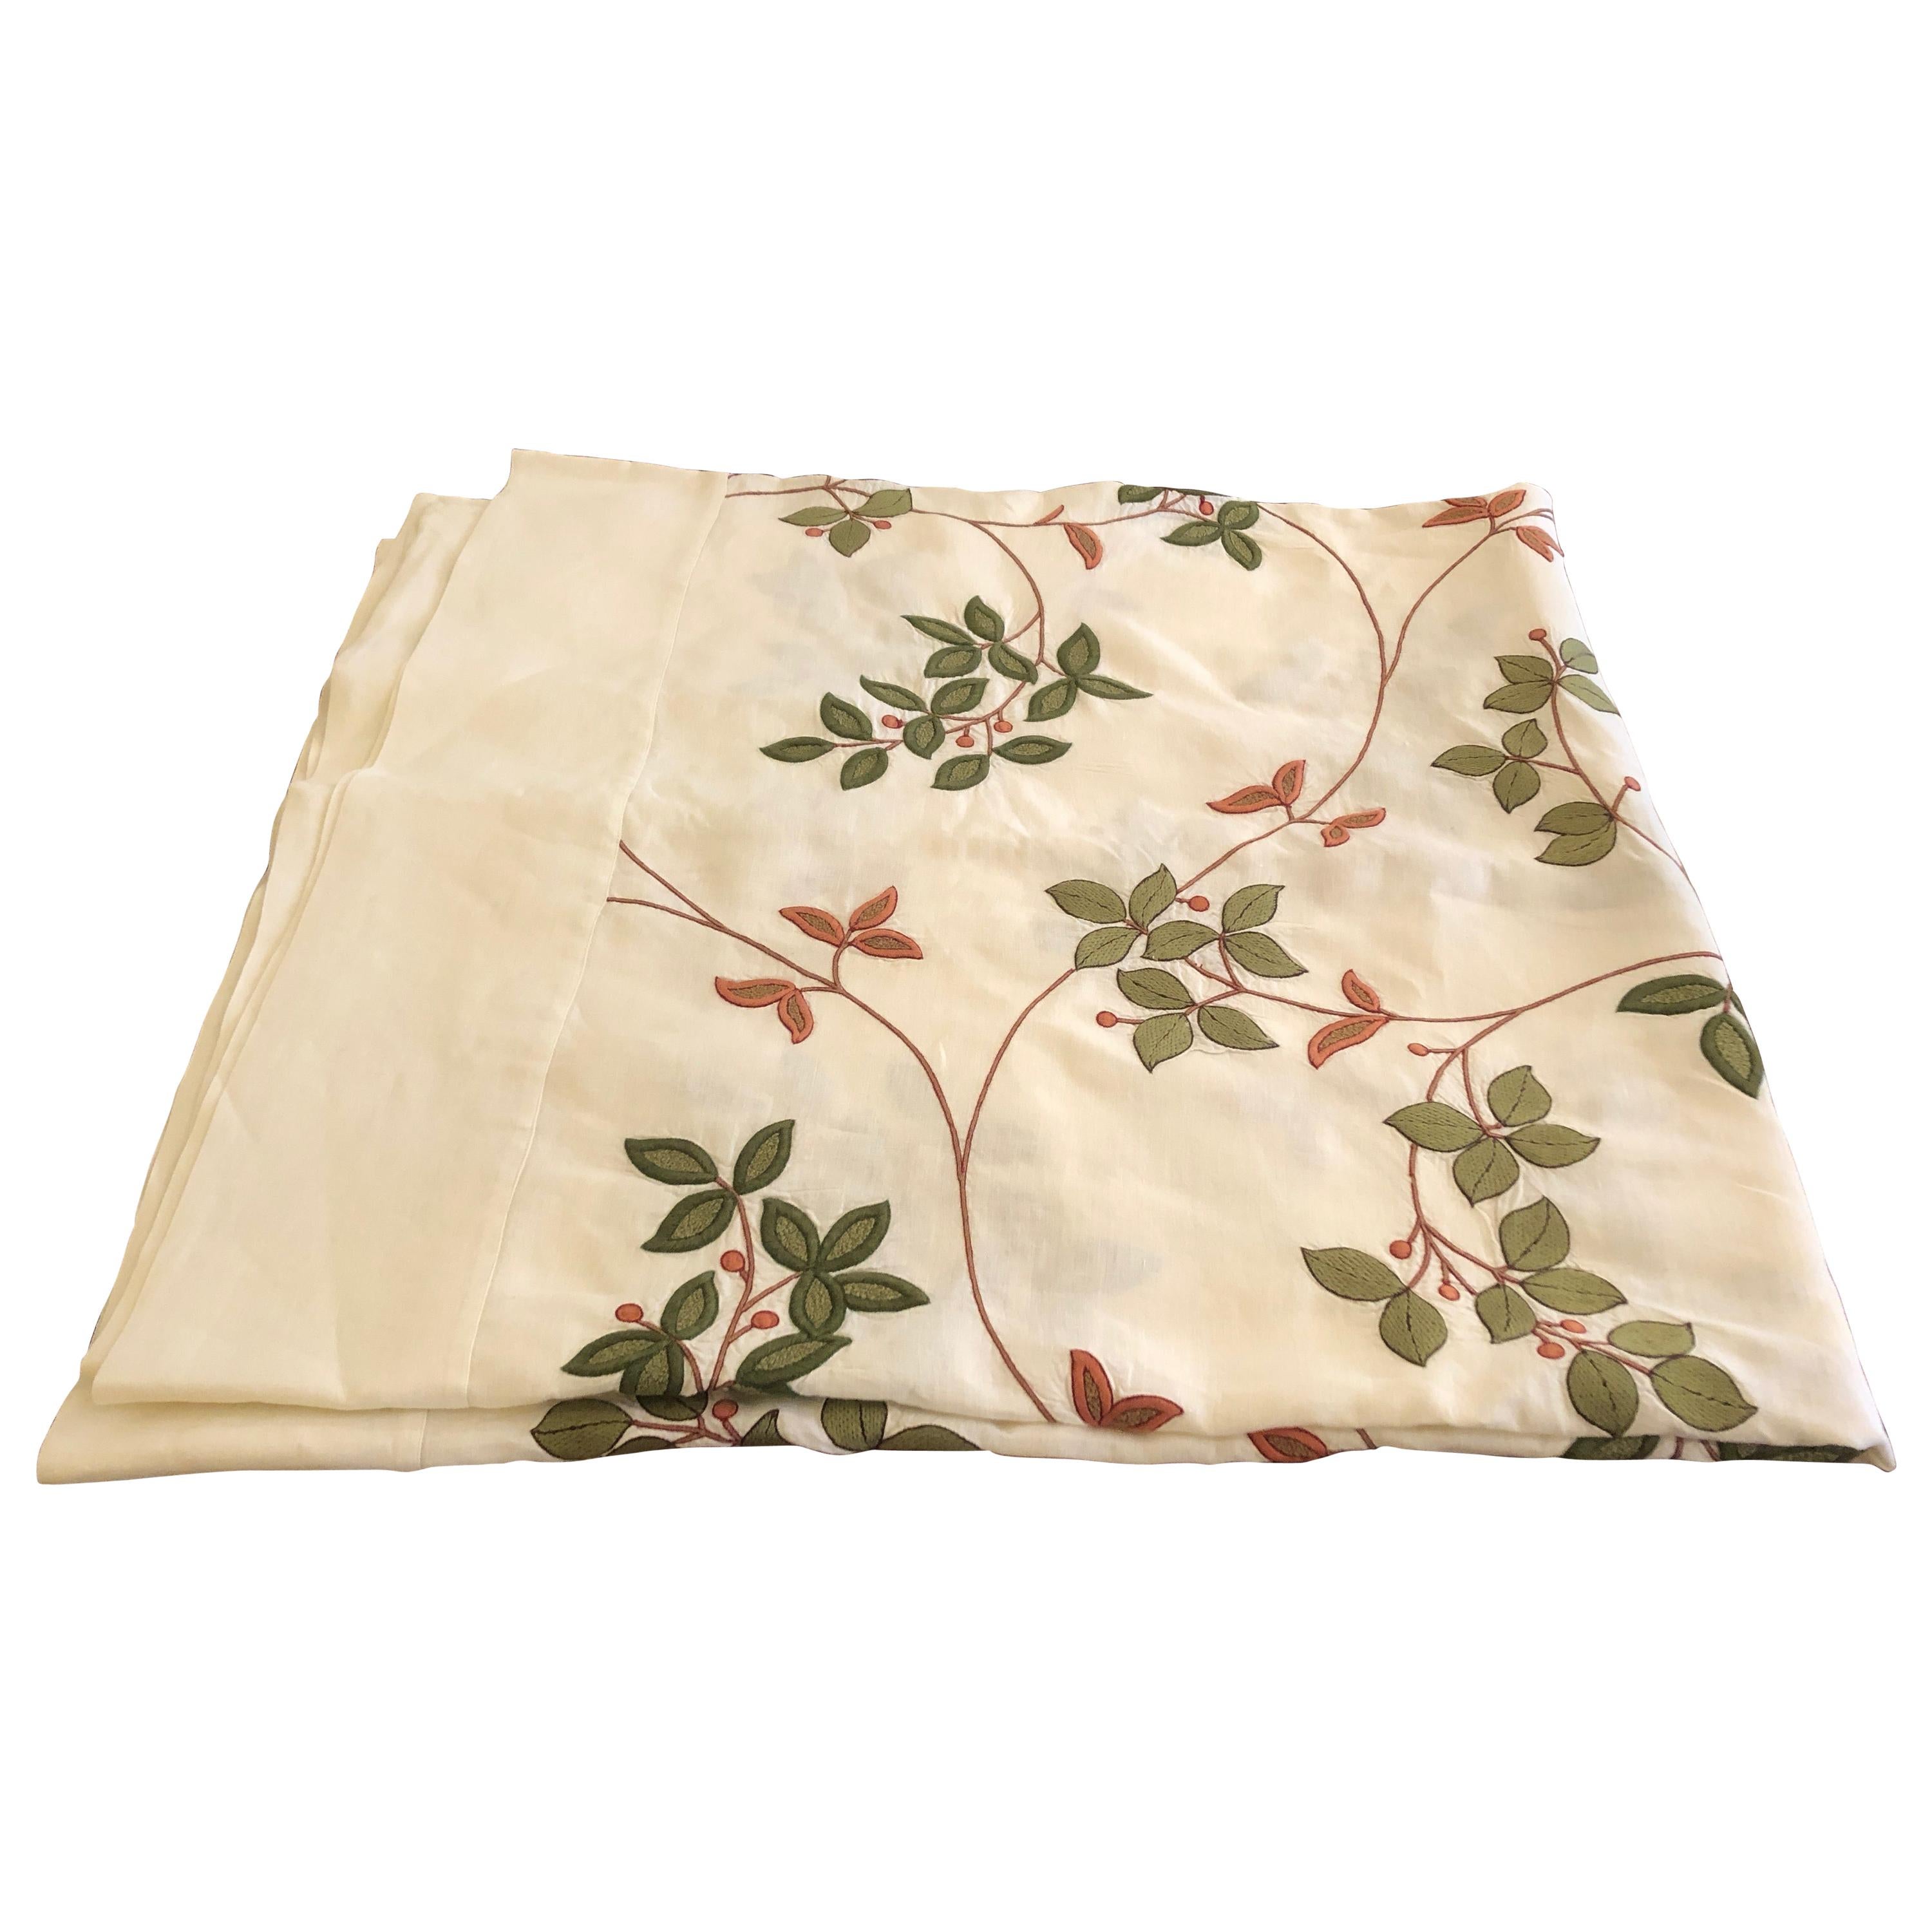 Elegant Linen and Hand Embroidered Table Cloth